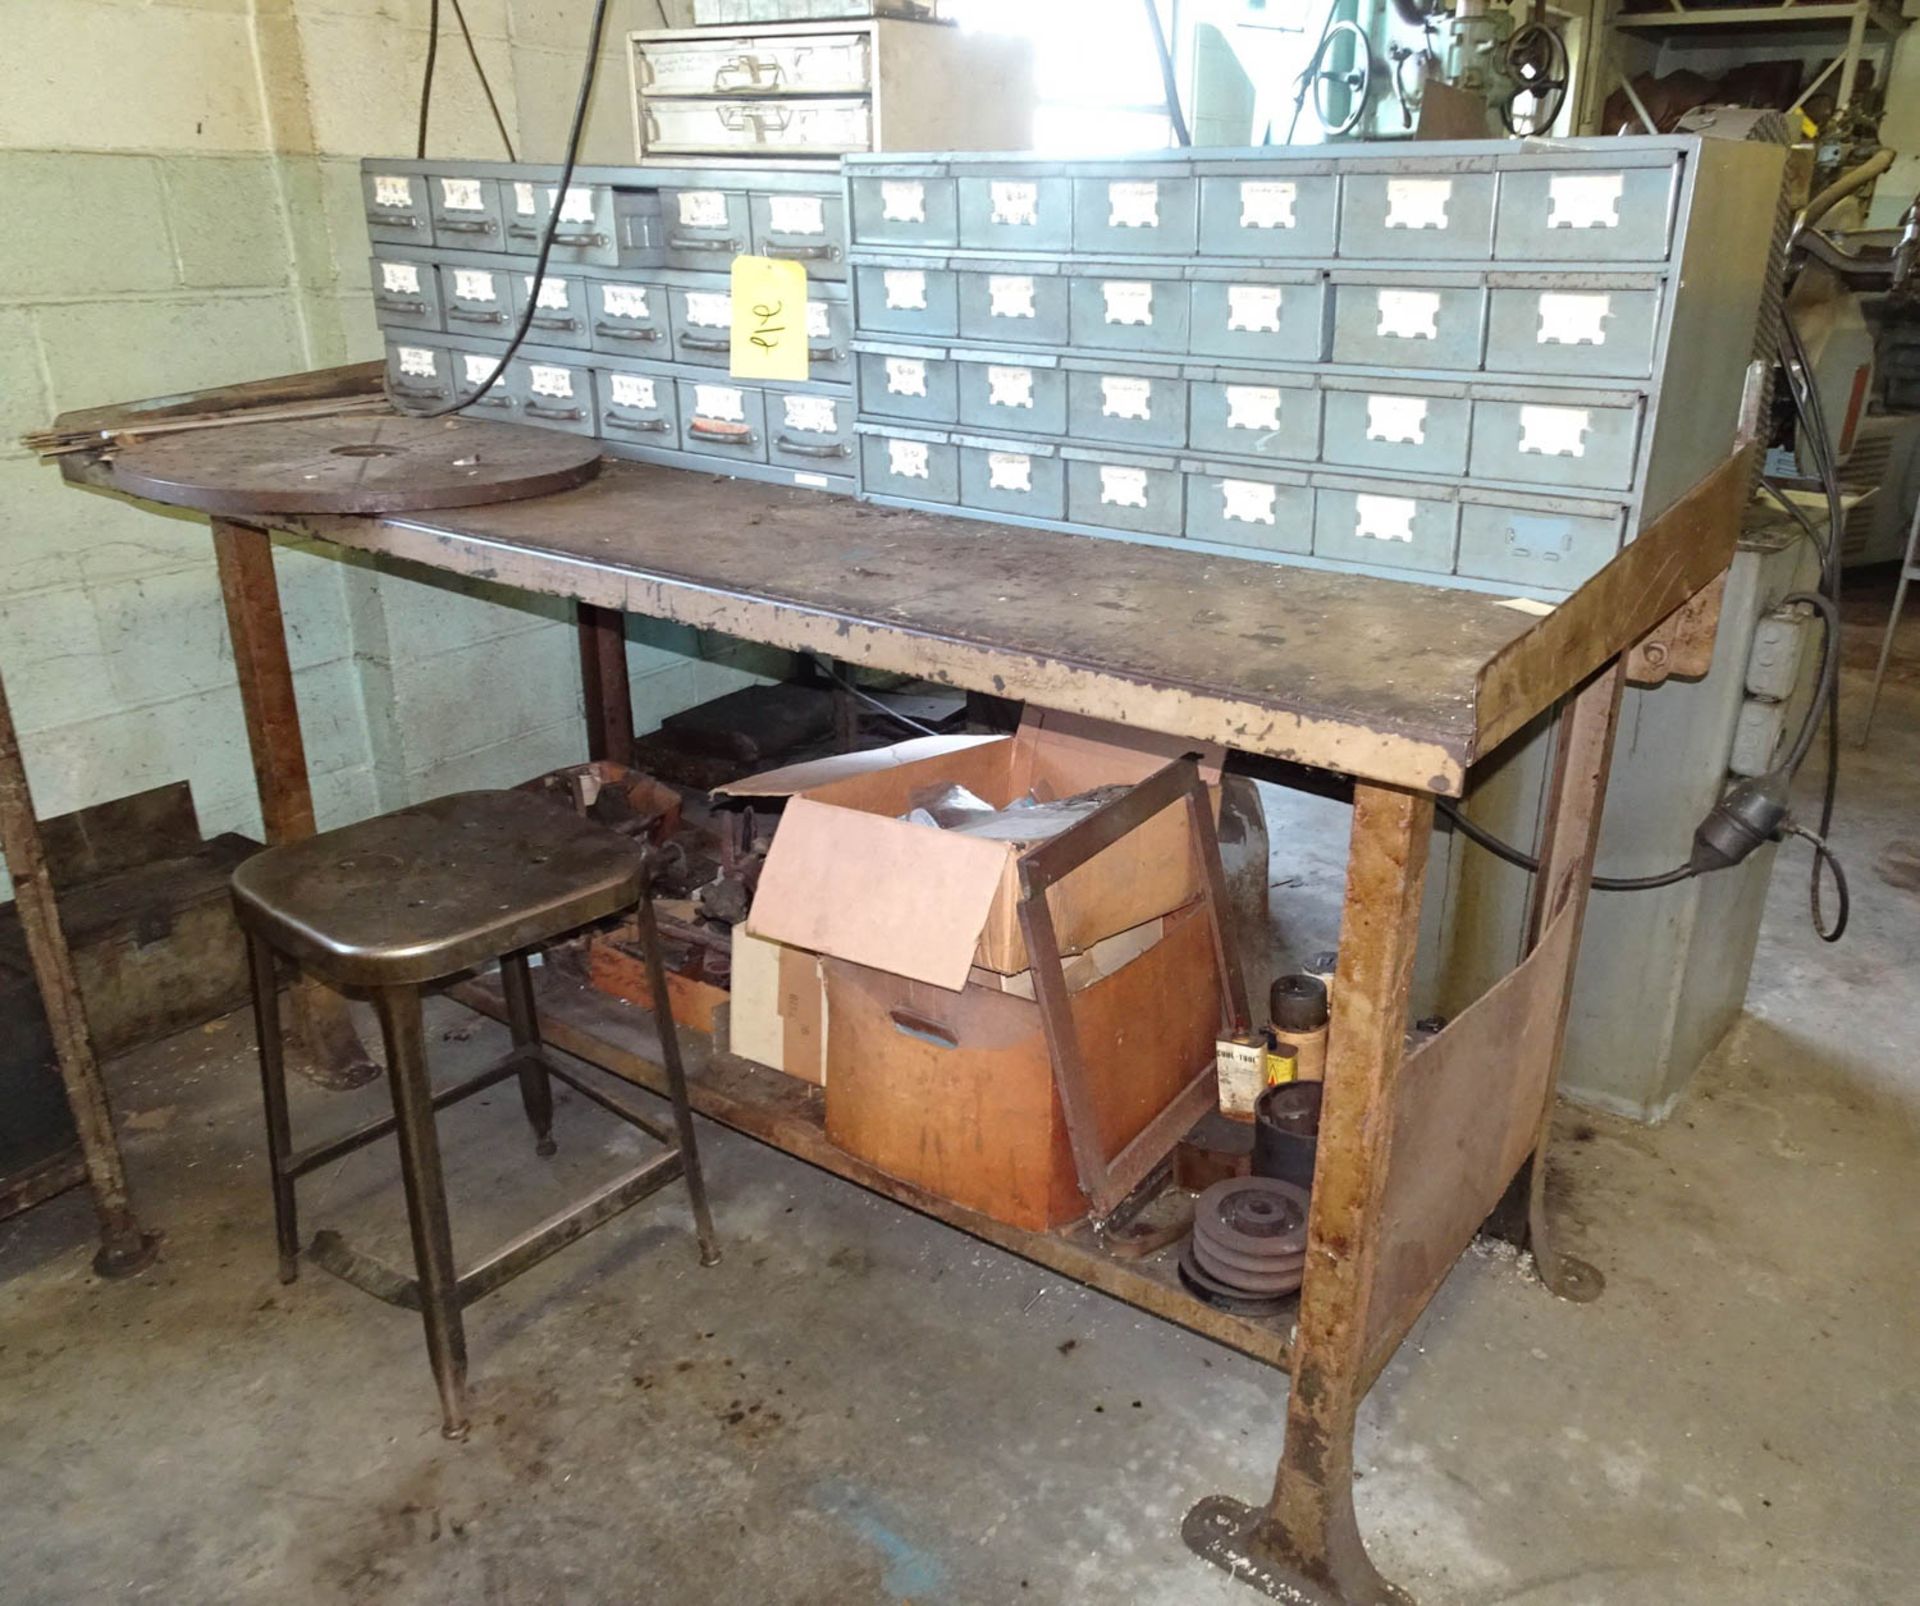 (3) SMALL PARTS BINS, (1) WORK BENCH WITH DRAWERS, (1) WORK BENCH WITH STEEL TOP AND STEEL LEGS, AND - Image 2 of 5